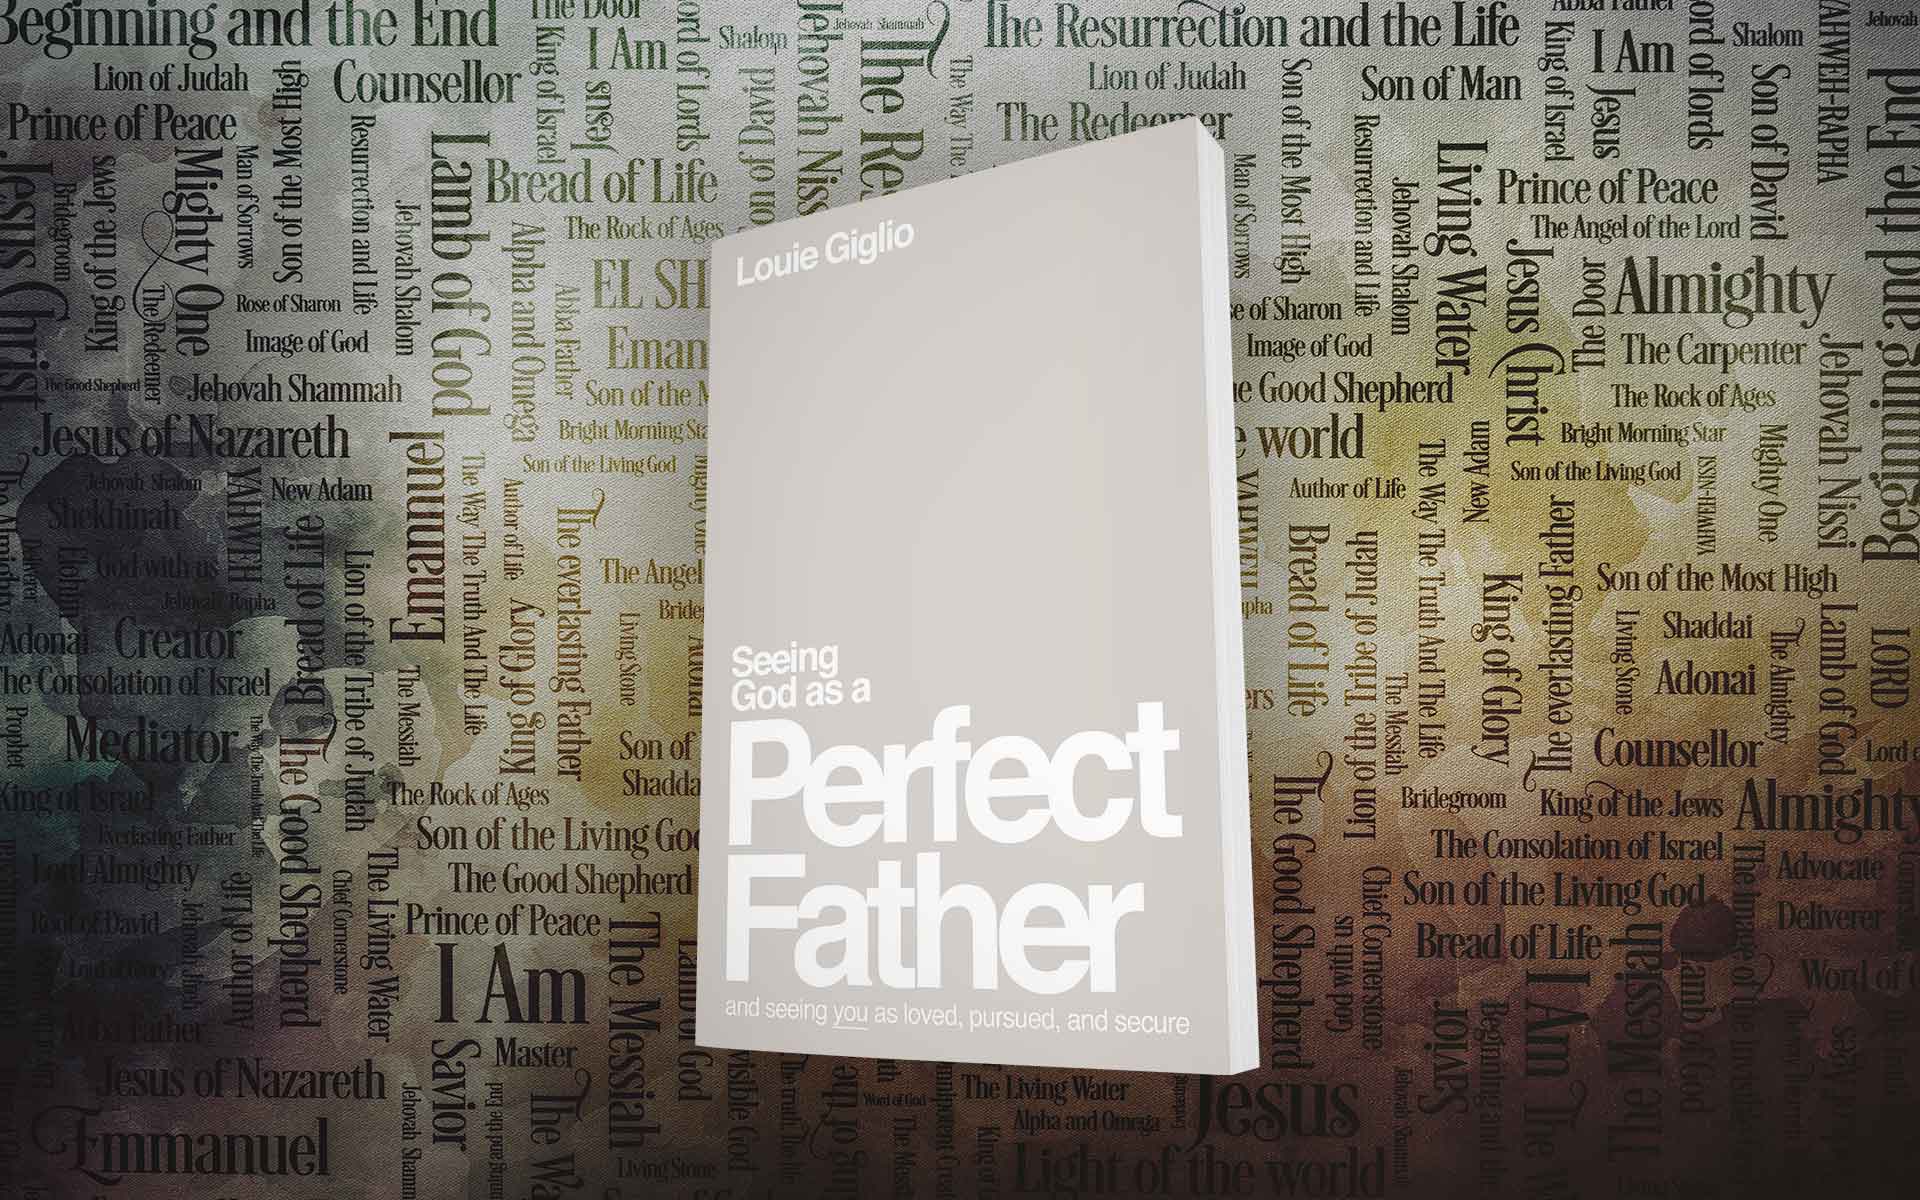 Seeing God as a Perfect Father - Part 2